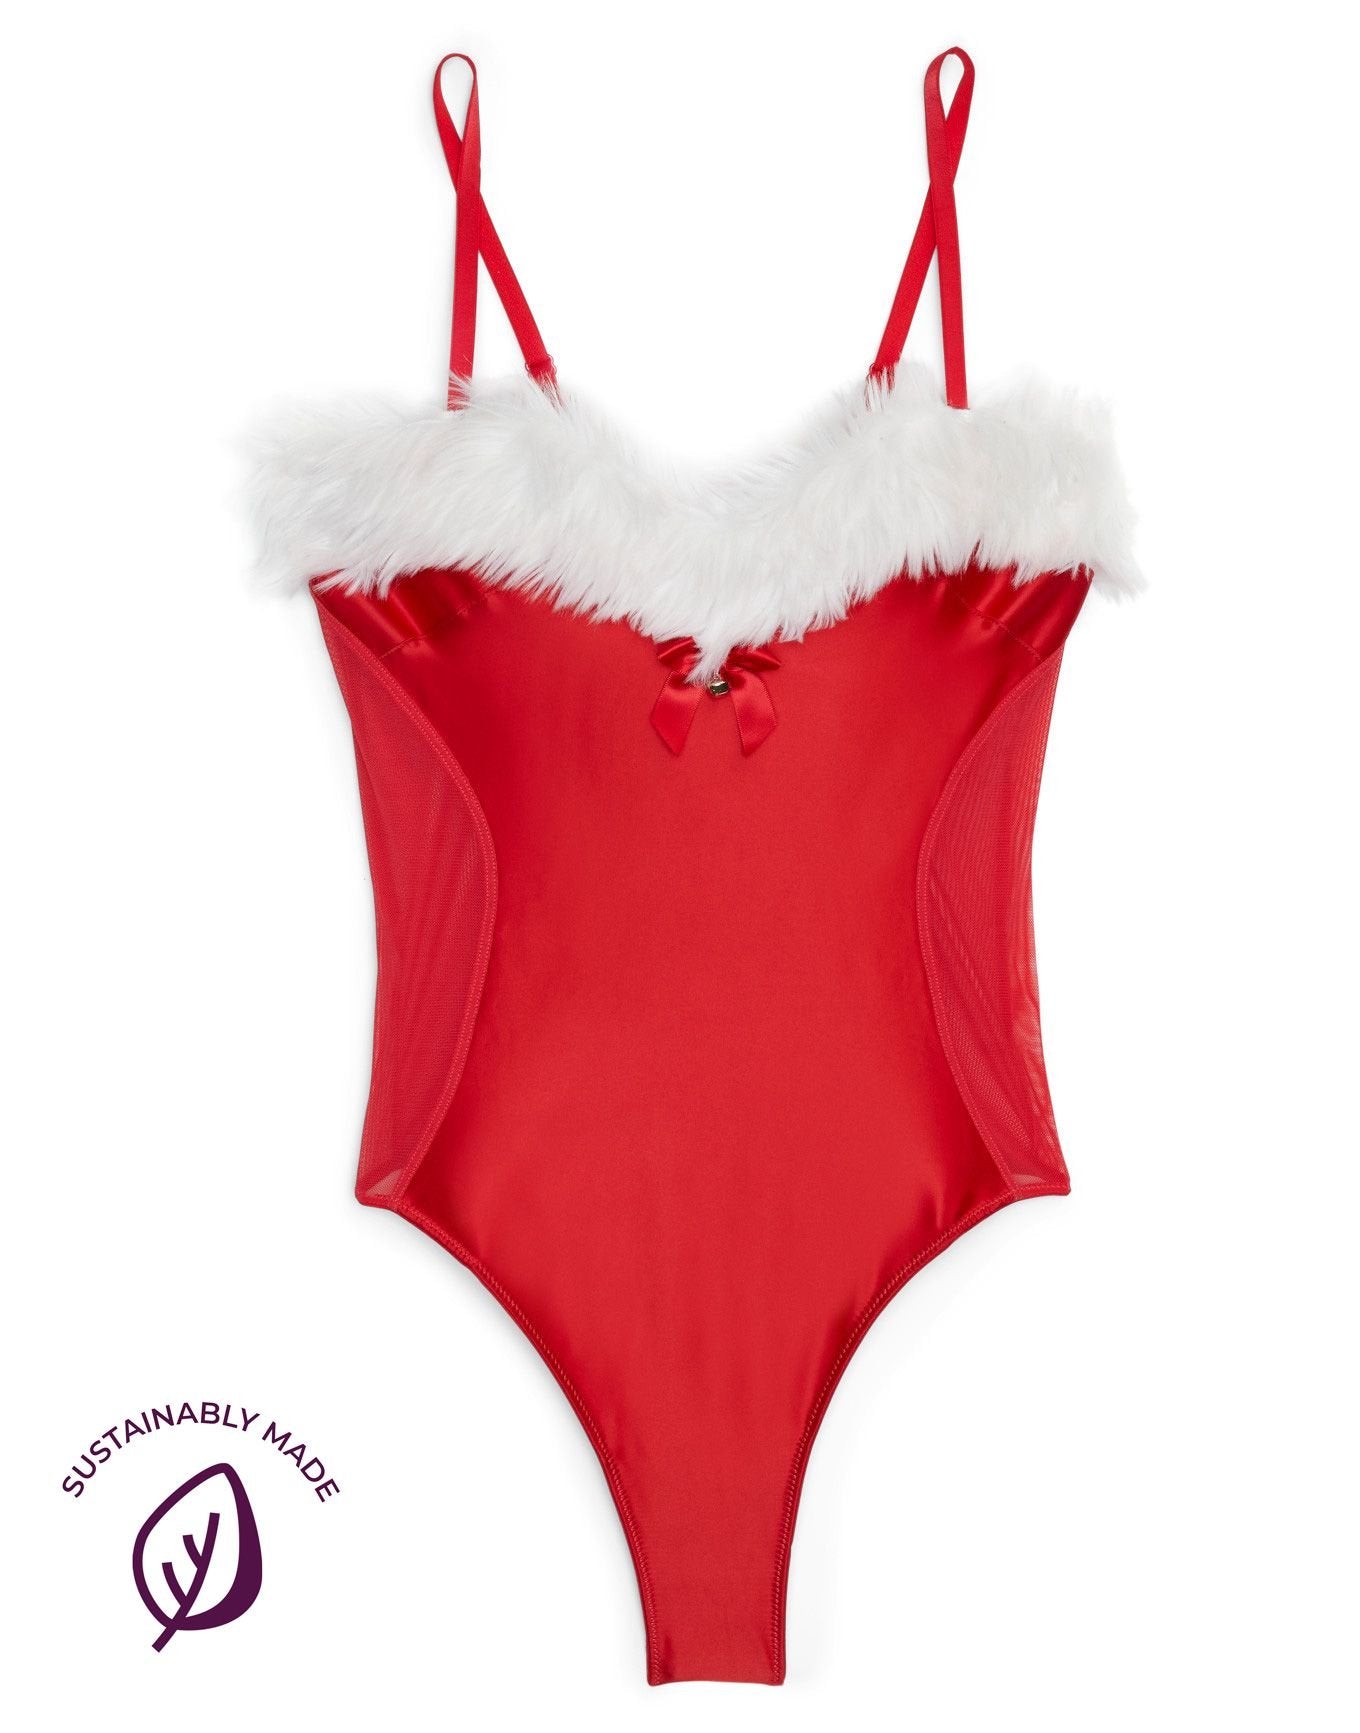 Adore Me Clausette Bodysuit in color True Red and shape bodysuit